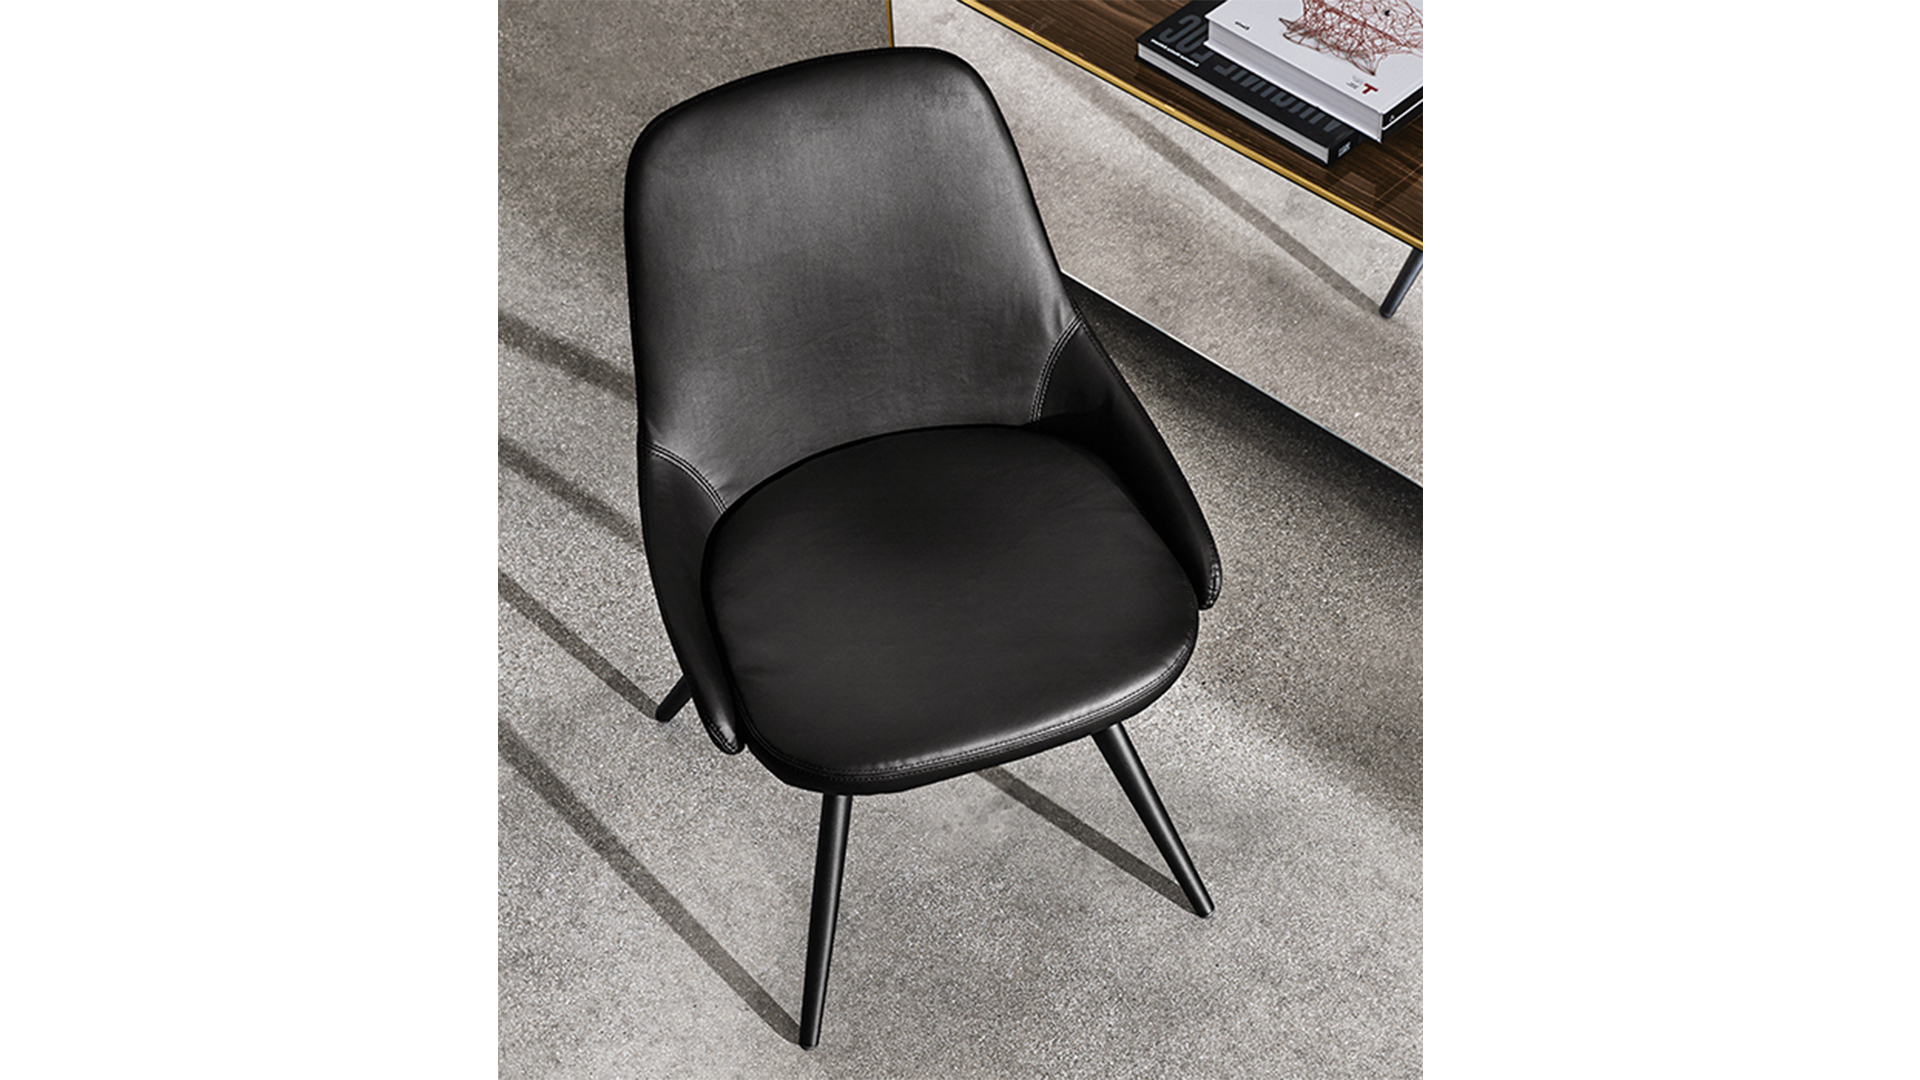 Cadira S coned shaped chair 01 (Website)